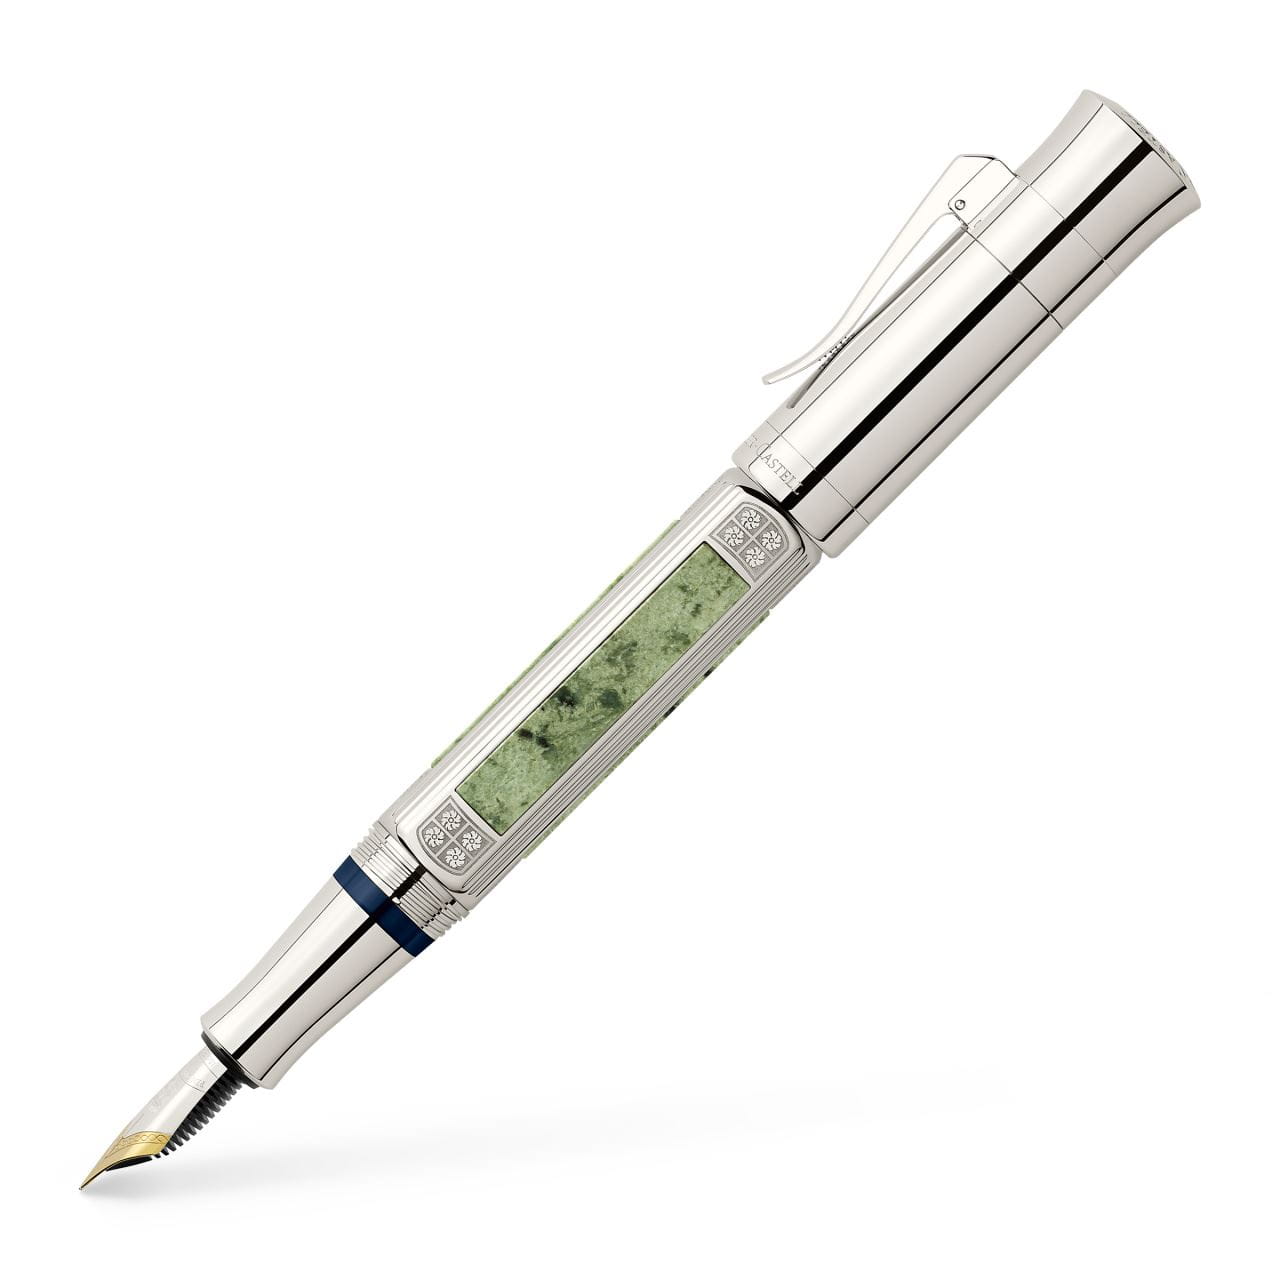 Graf-von-Faber-Castell - Fountain pen Pen of the Year 2015, Extra Broad